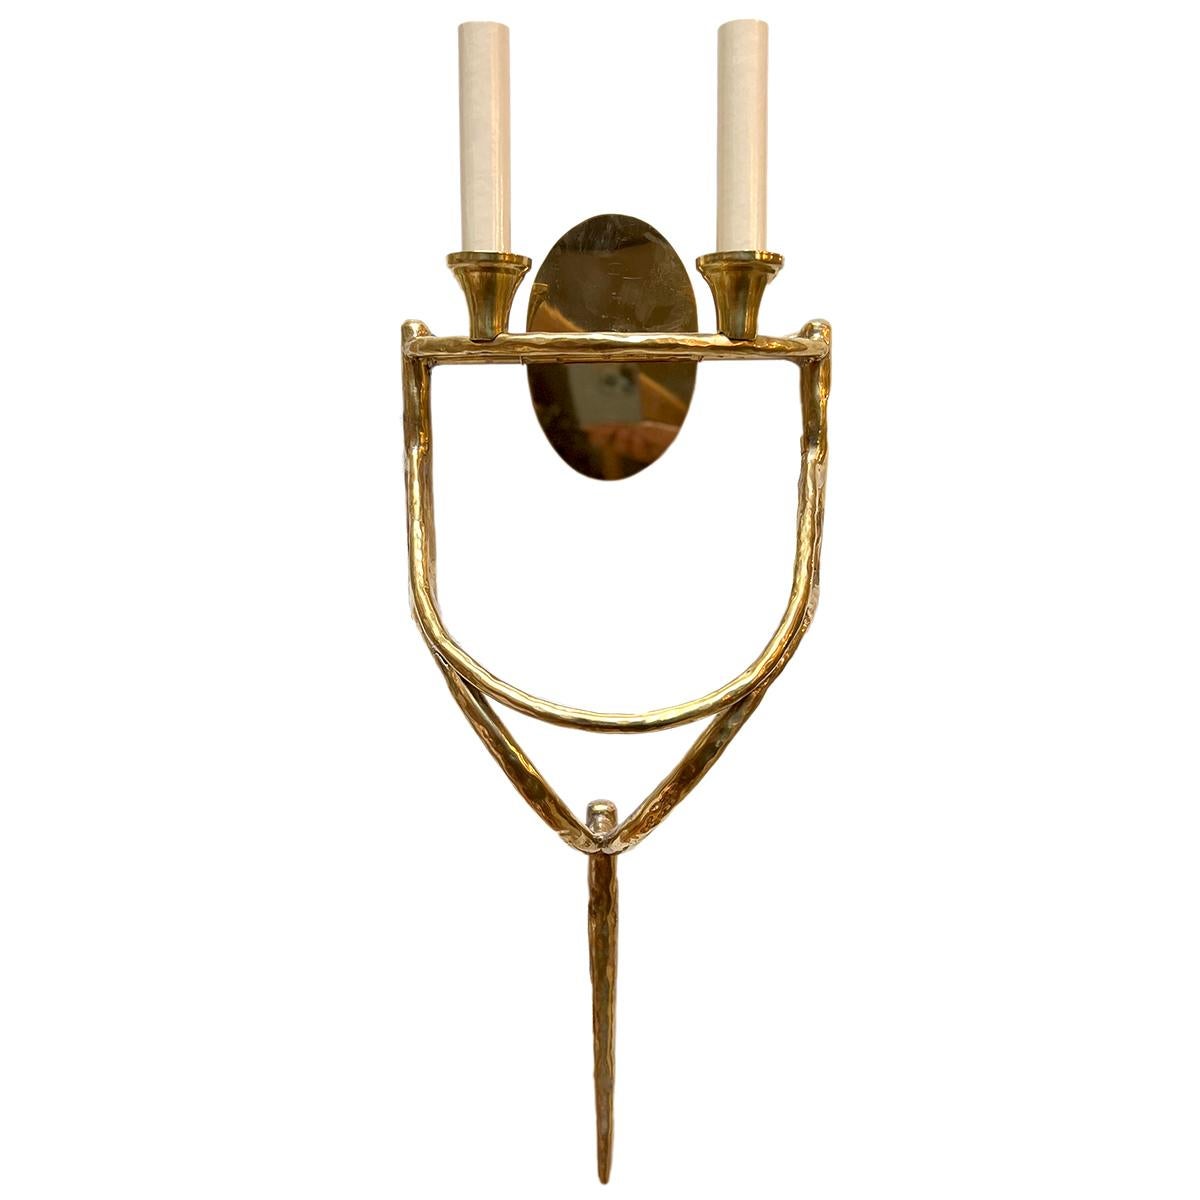 Set of six circa 1950s French polished bronze moderne style two-light bronze sconces, in original patina. Custom Bronze Shades available separately.

Measurements:
Height 22